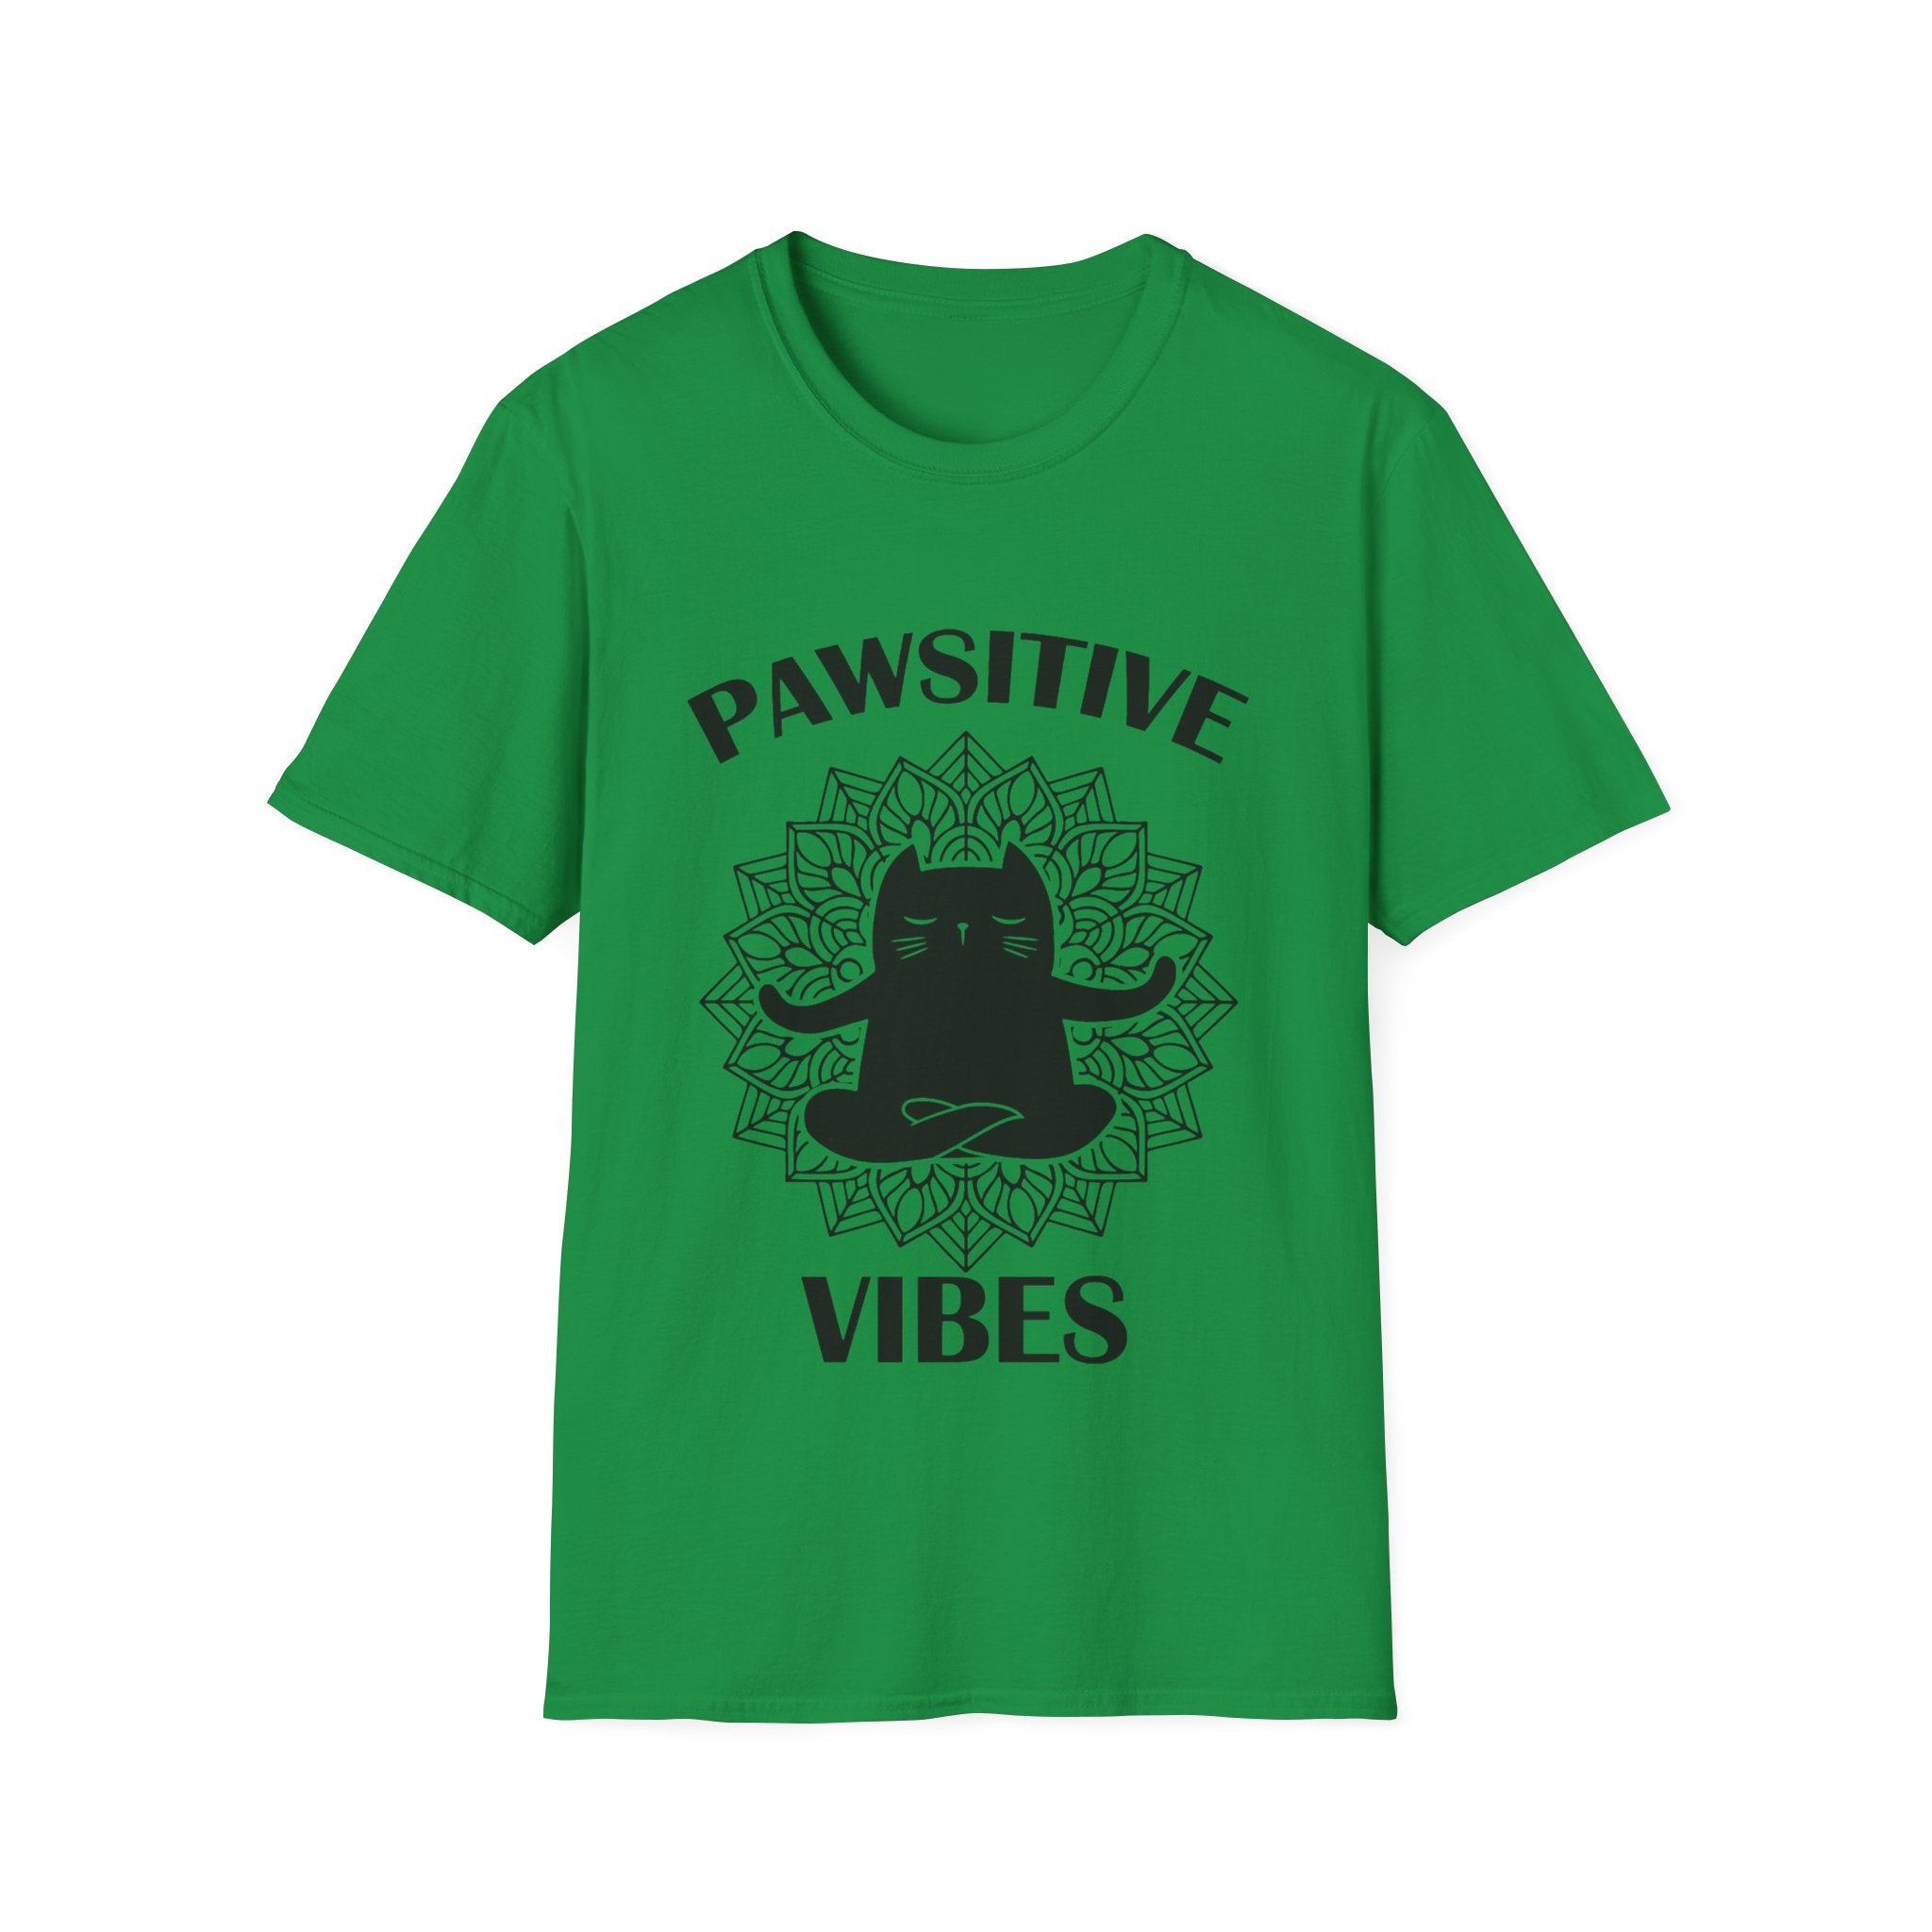 Pawsitive Vibes T-Shirt: Embrace the Zen with a Meditating Cat!